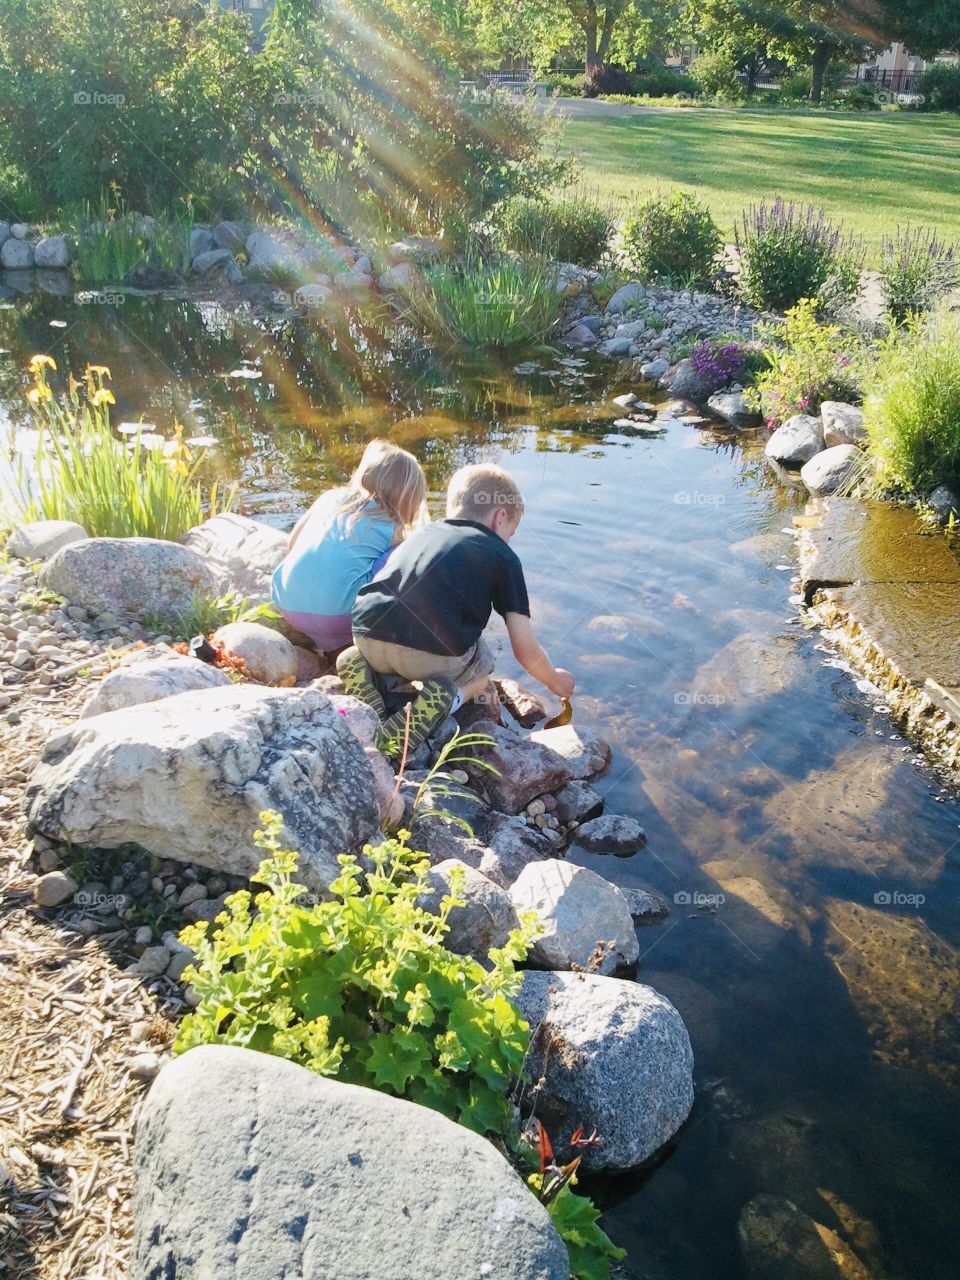 Darling sunny day photo of two siblings sweetly searching for tadpoles together! 